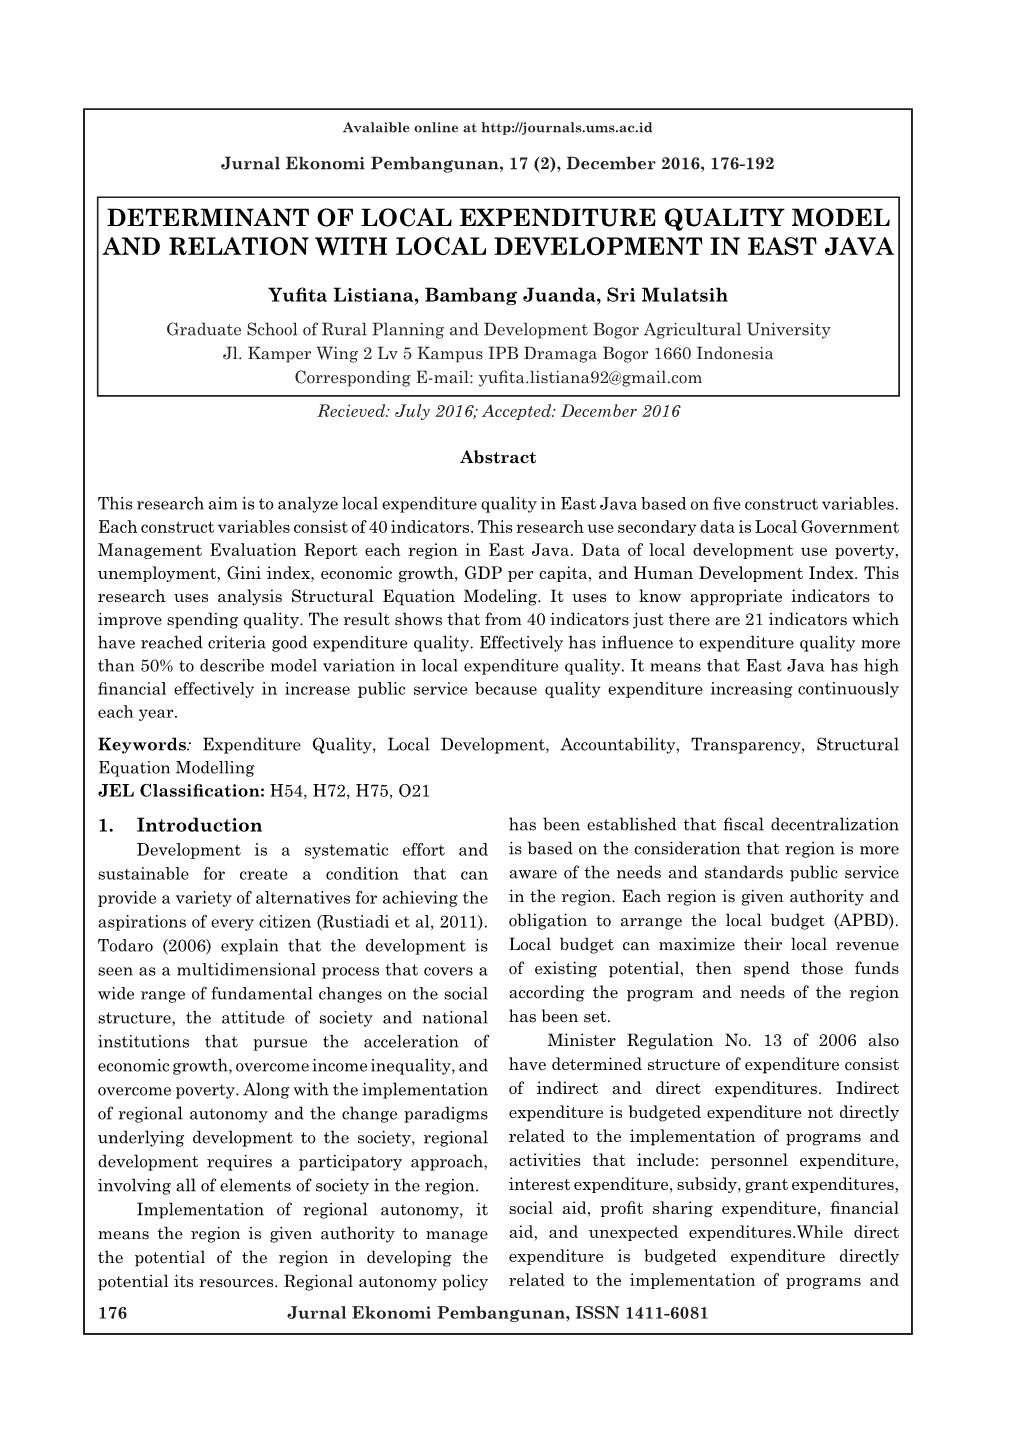 Determinant of Local Expenditure Quality Model and Relation with Local Development in East Java